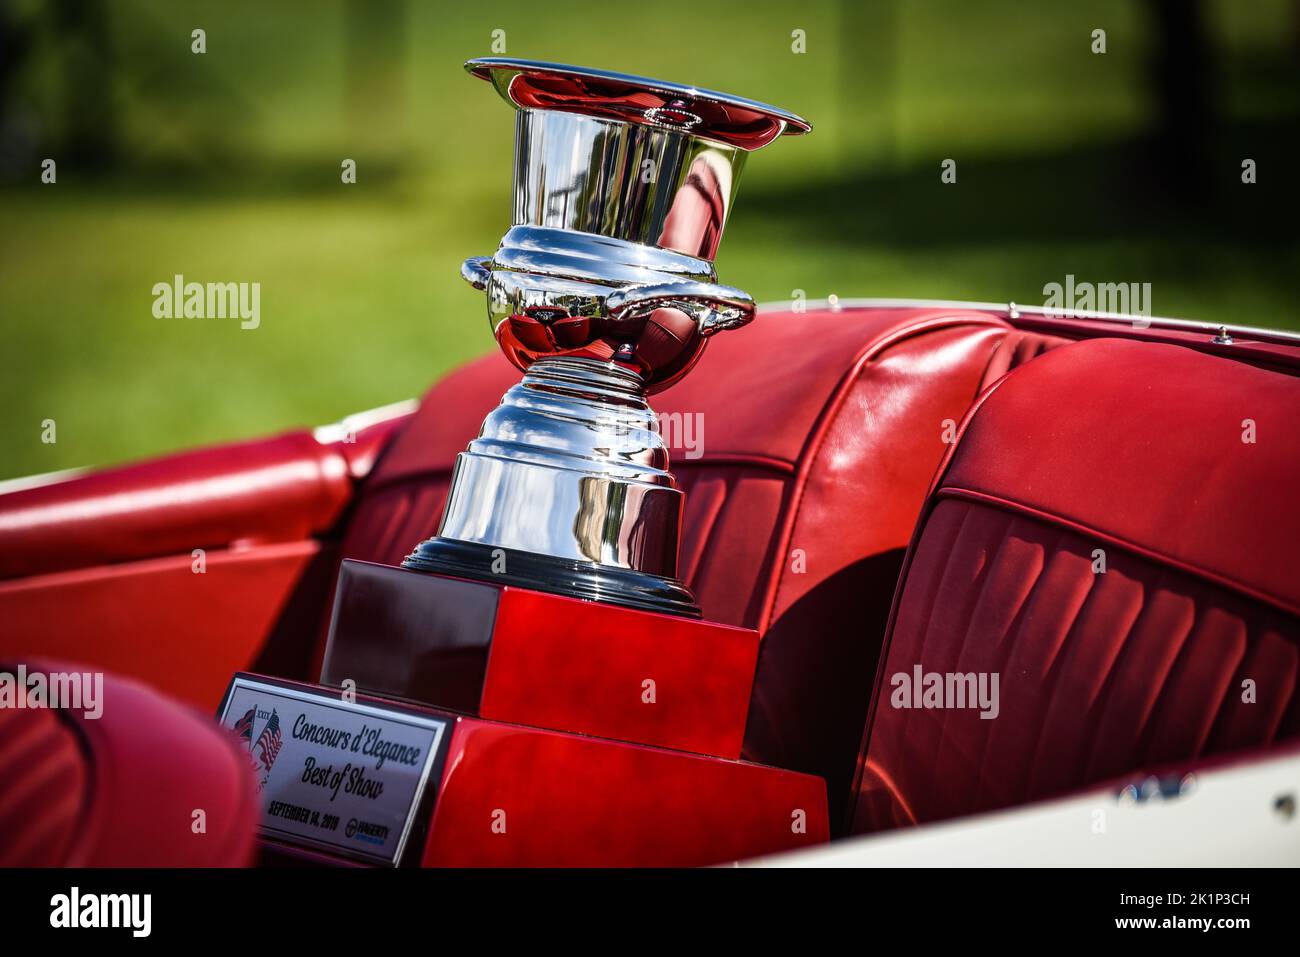 Concours d'elegance Best of Show trophy at the 'British Invasion' sports car show in Stowe, Vermont, USA. Stock Photo